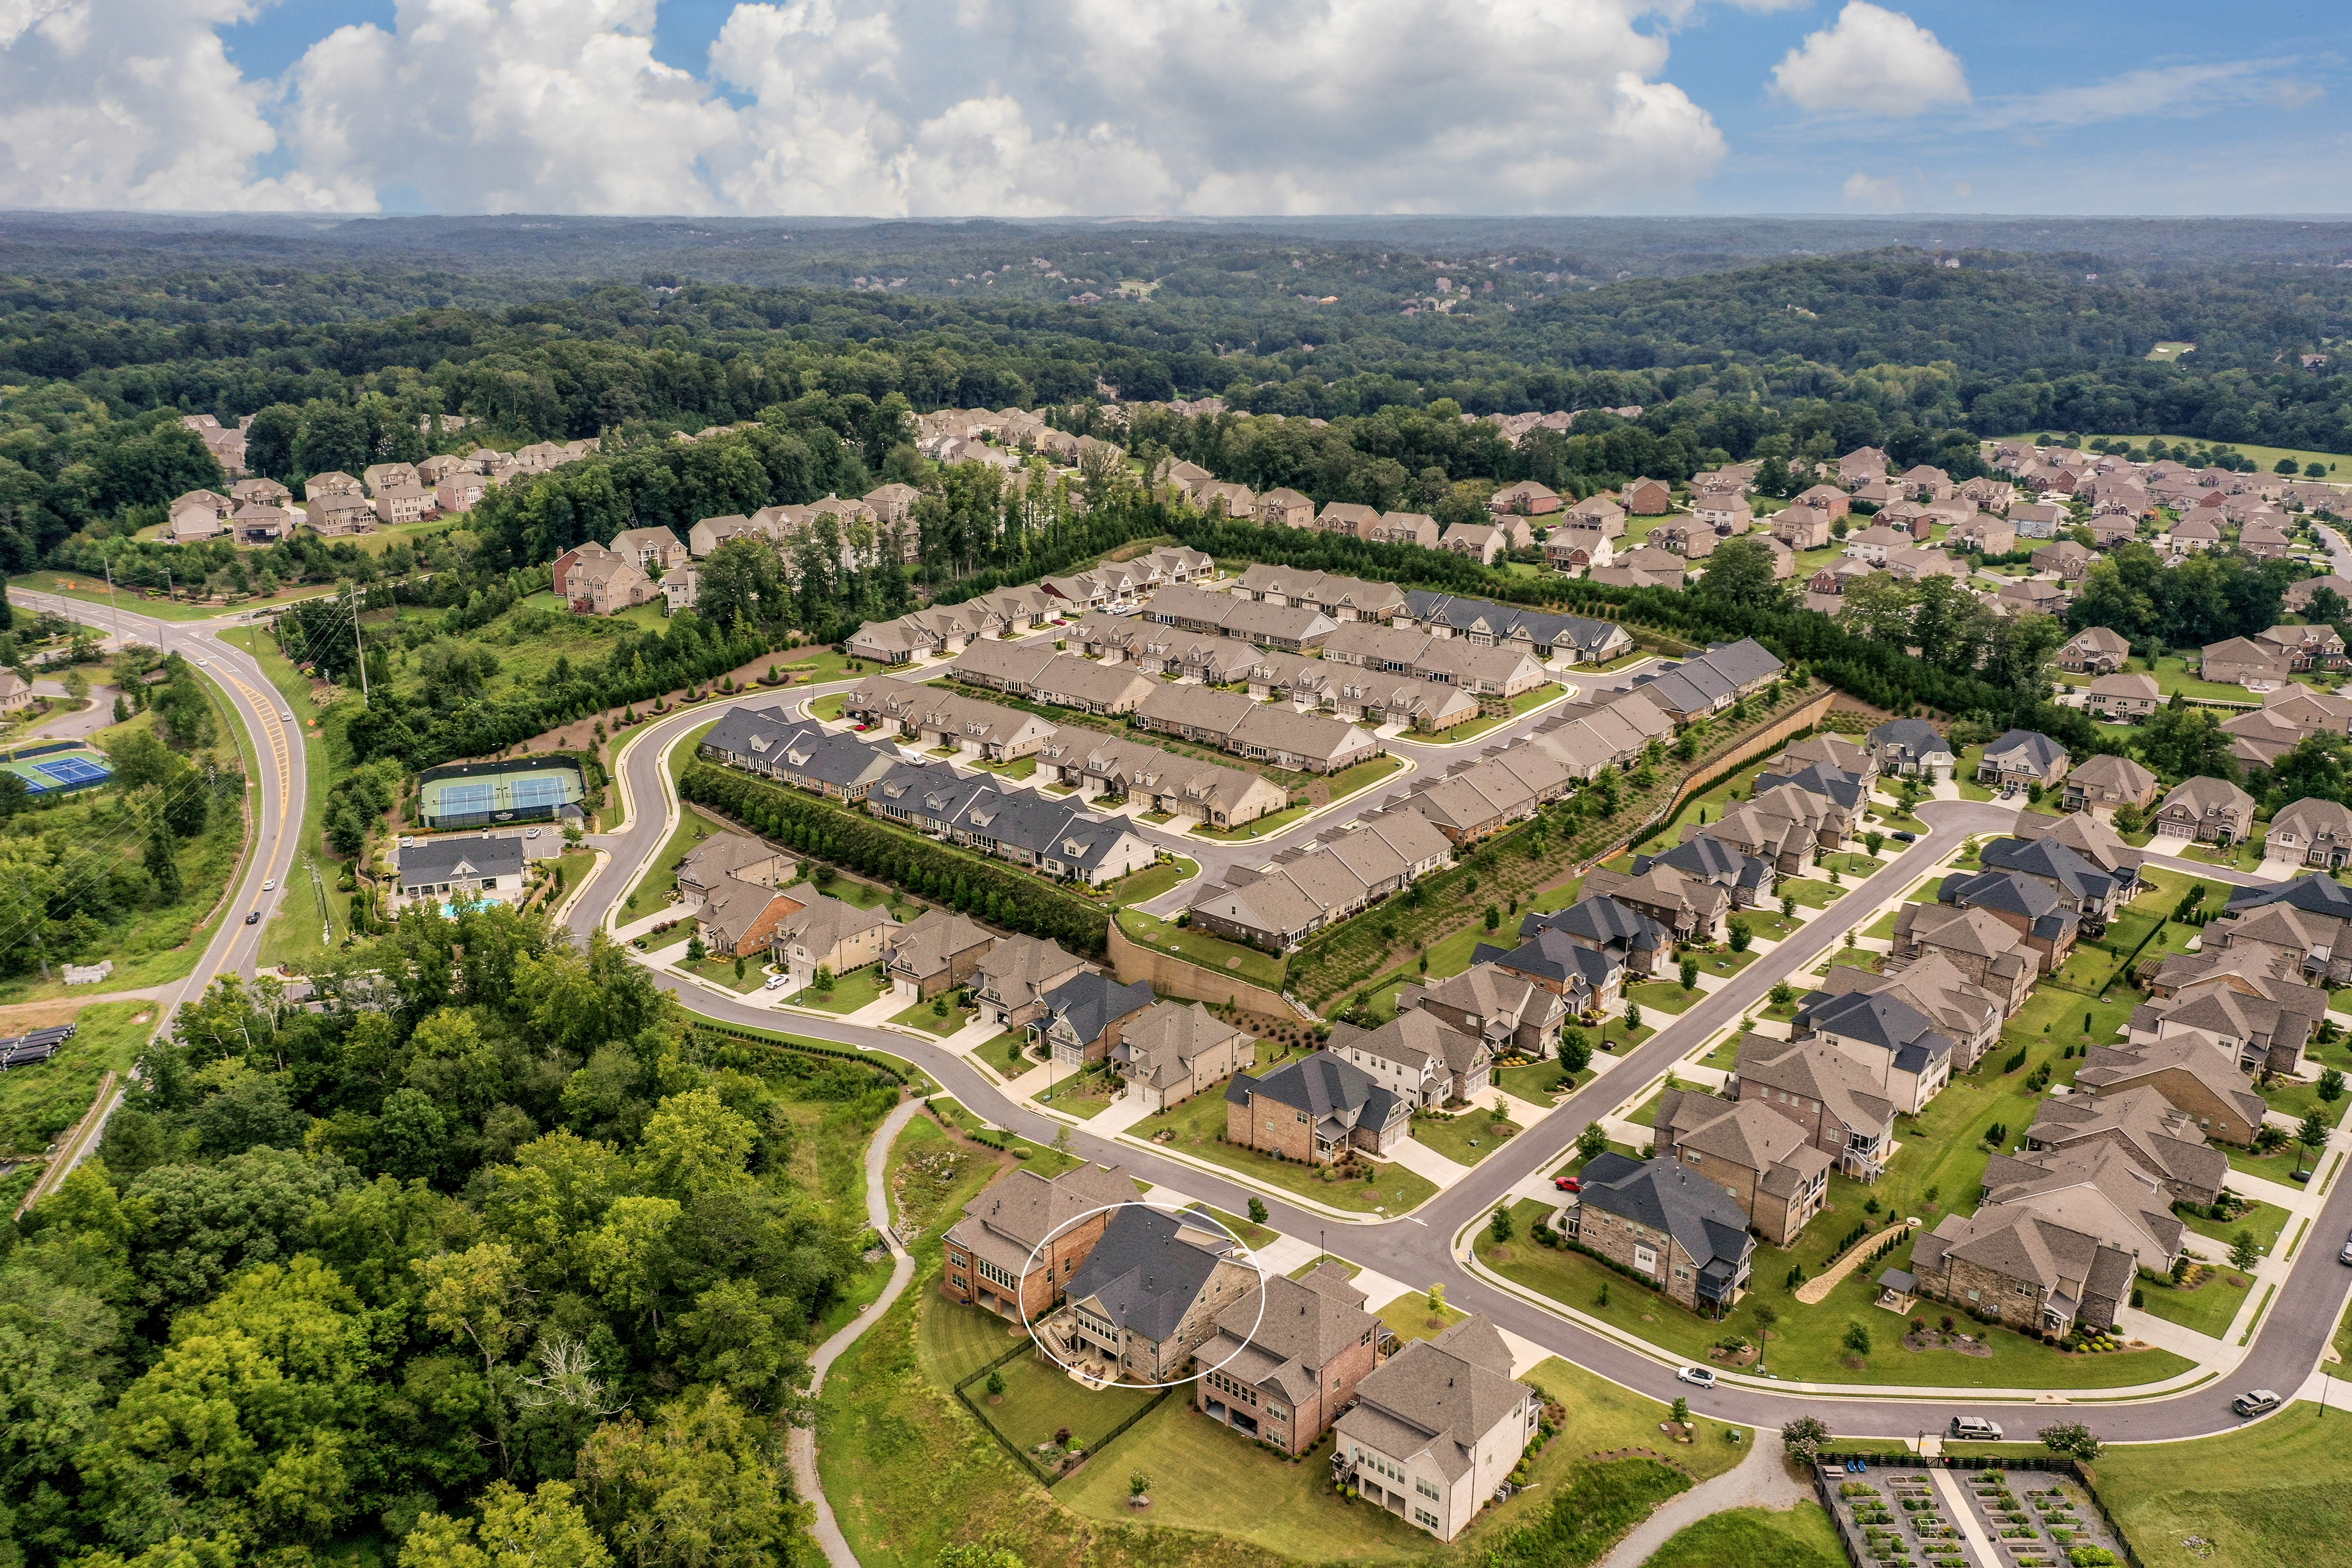 55+ Active Adult Community - The Overlook at Old Atlanta